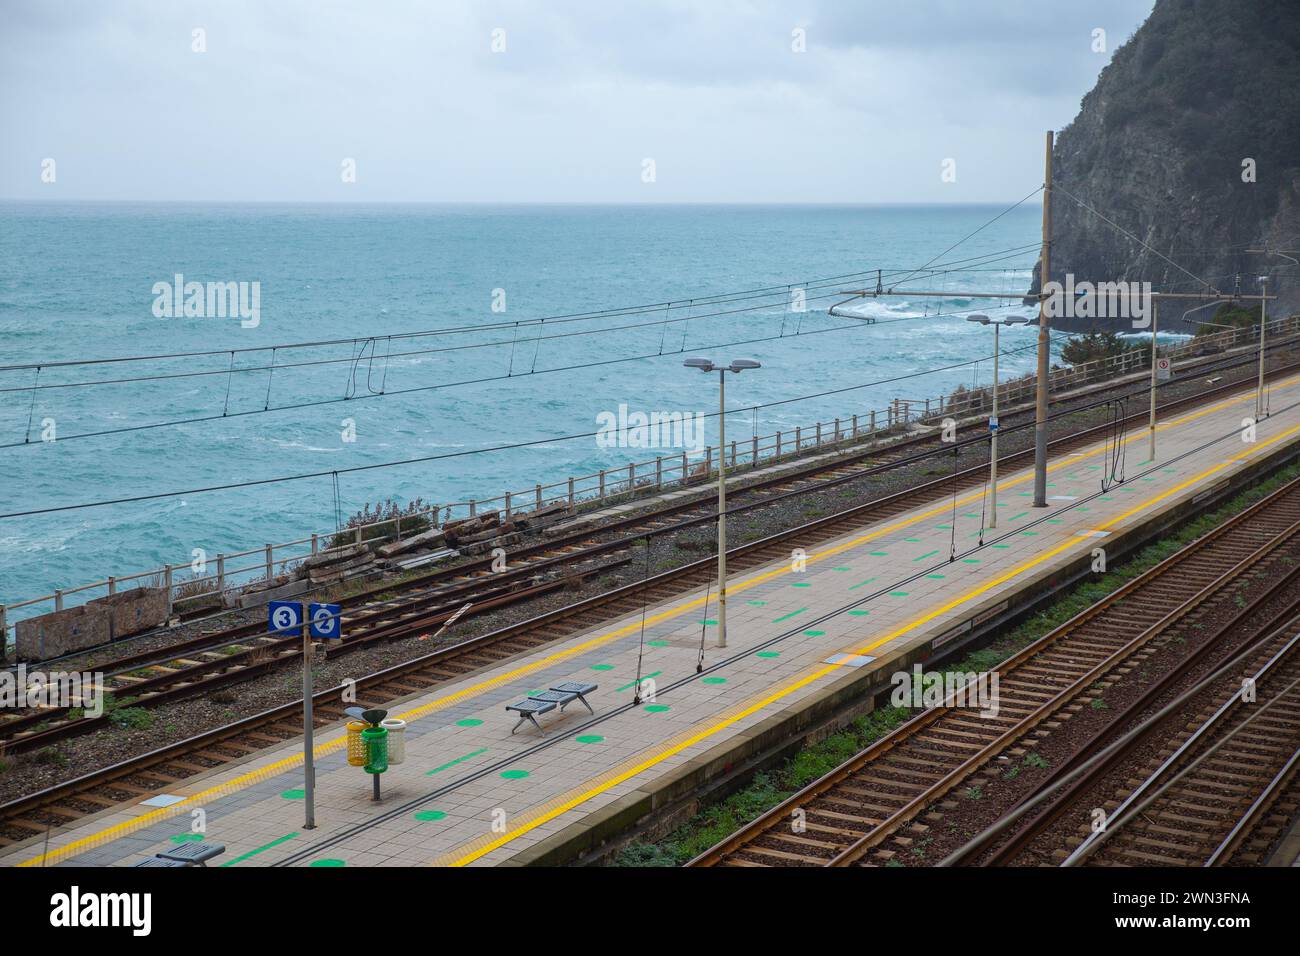 Overlook of the coastal railway track and platform with sea Stock Photo